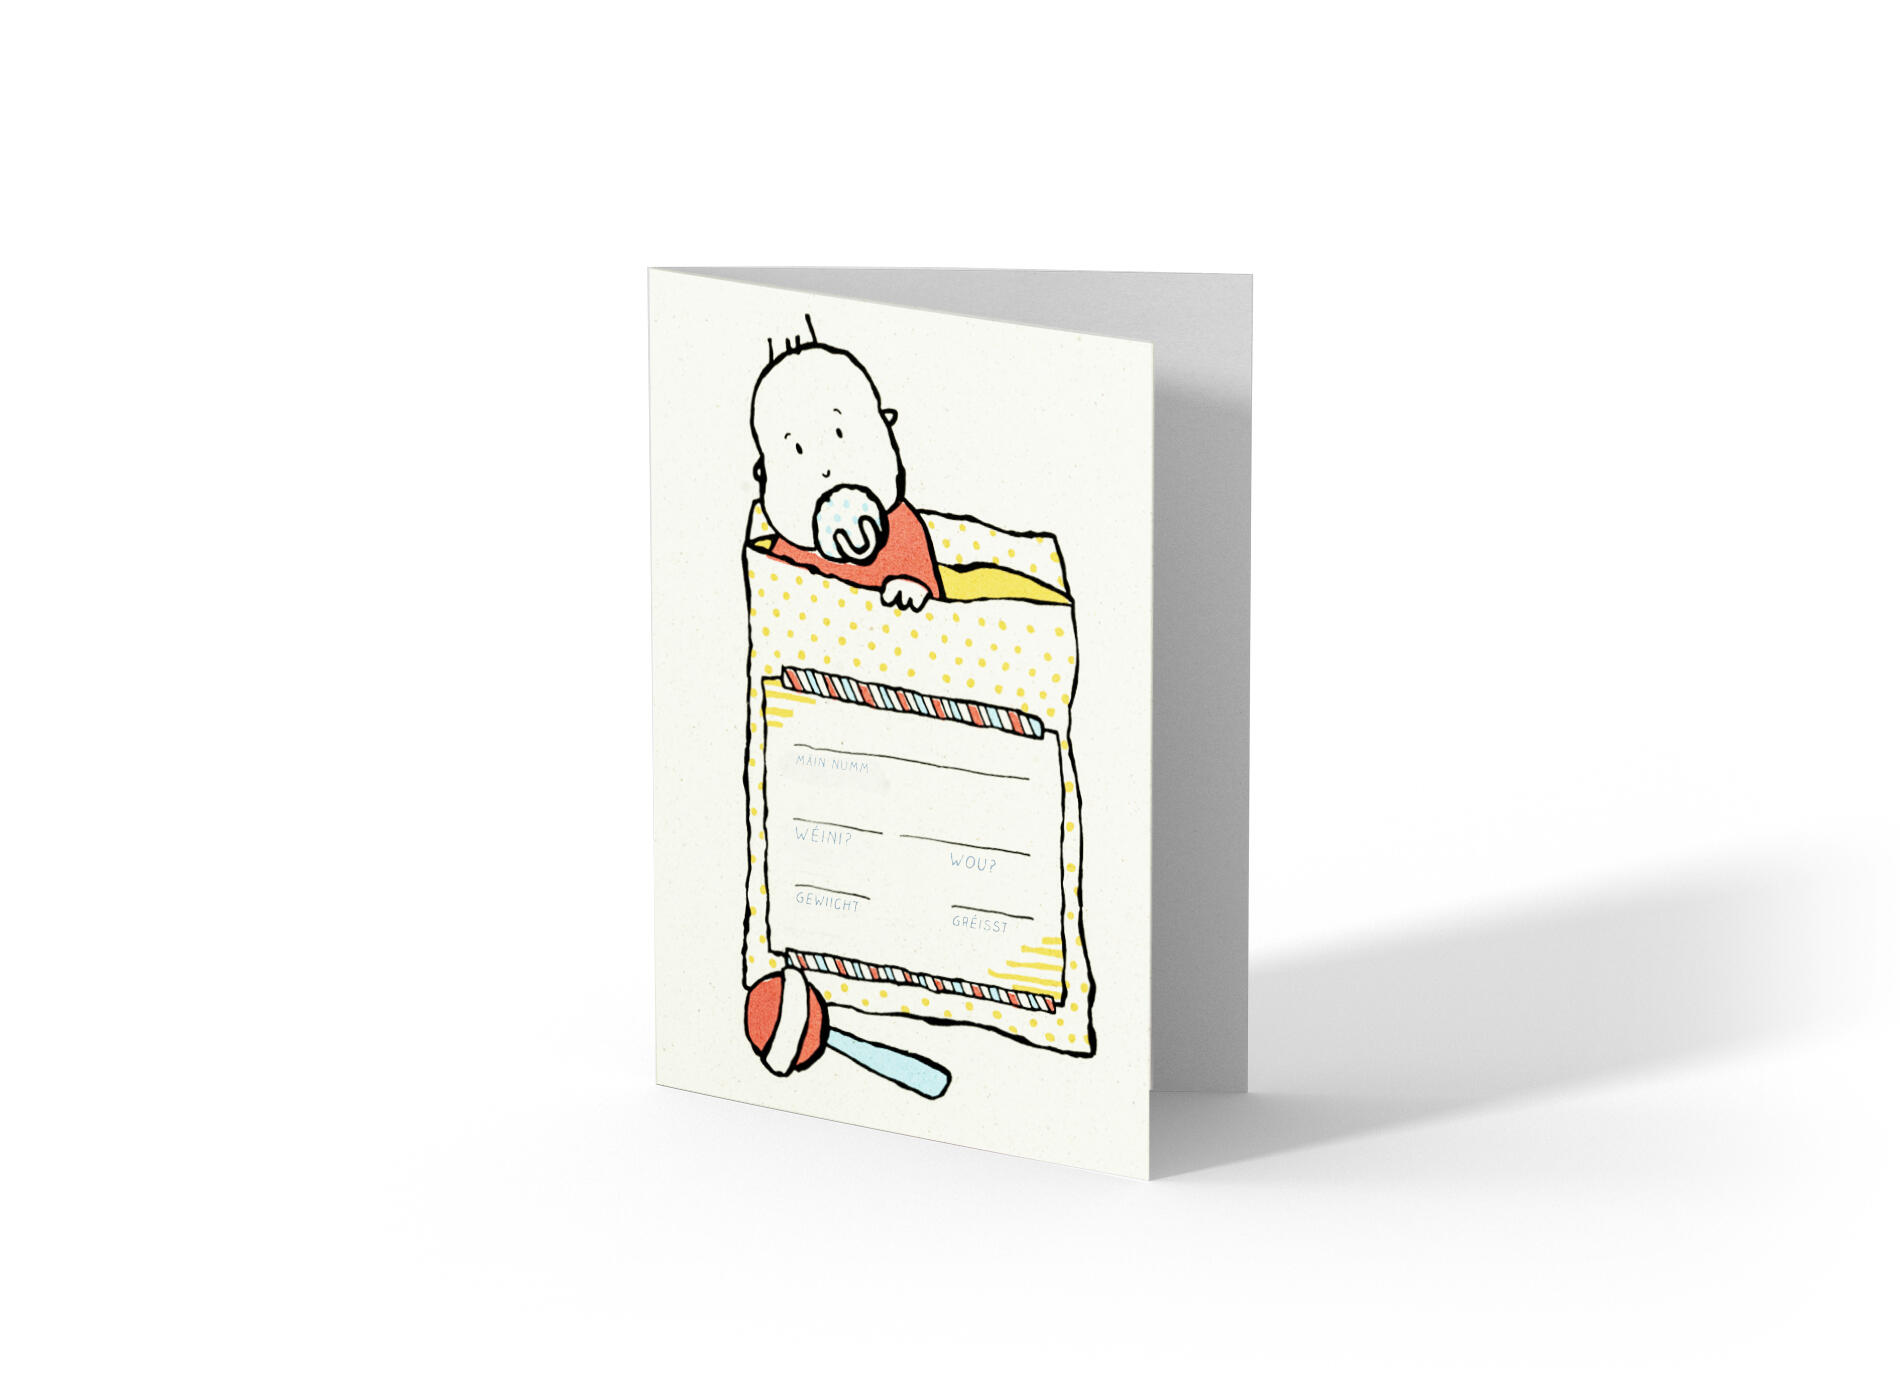 Greeting cards to congratulate the birth of a child